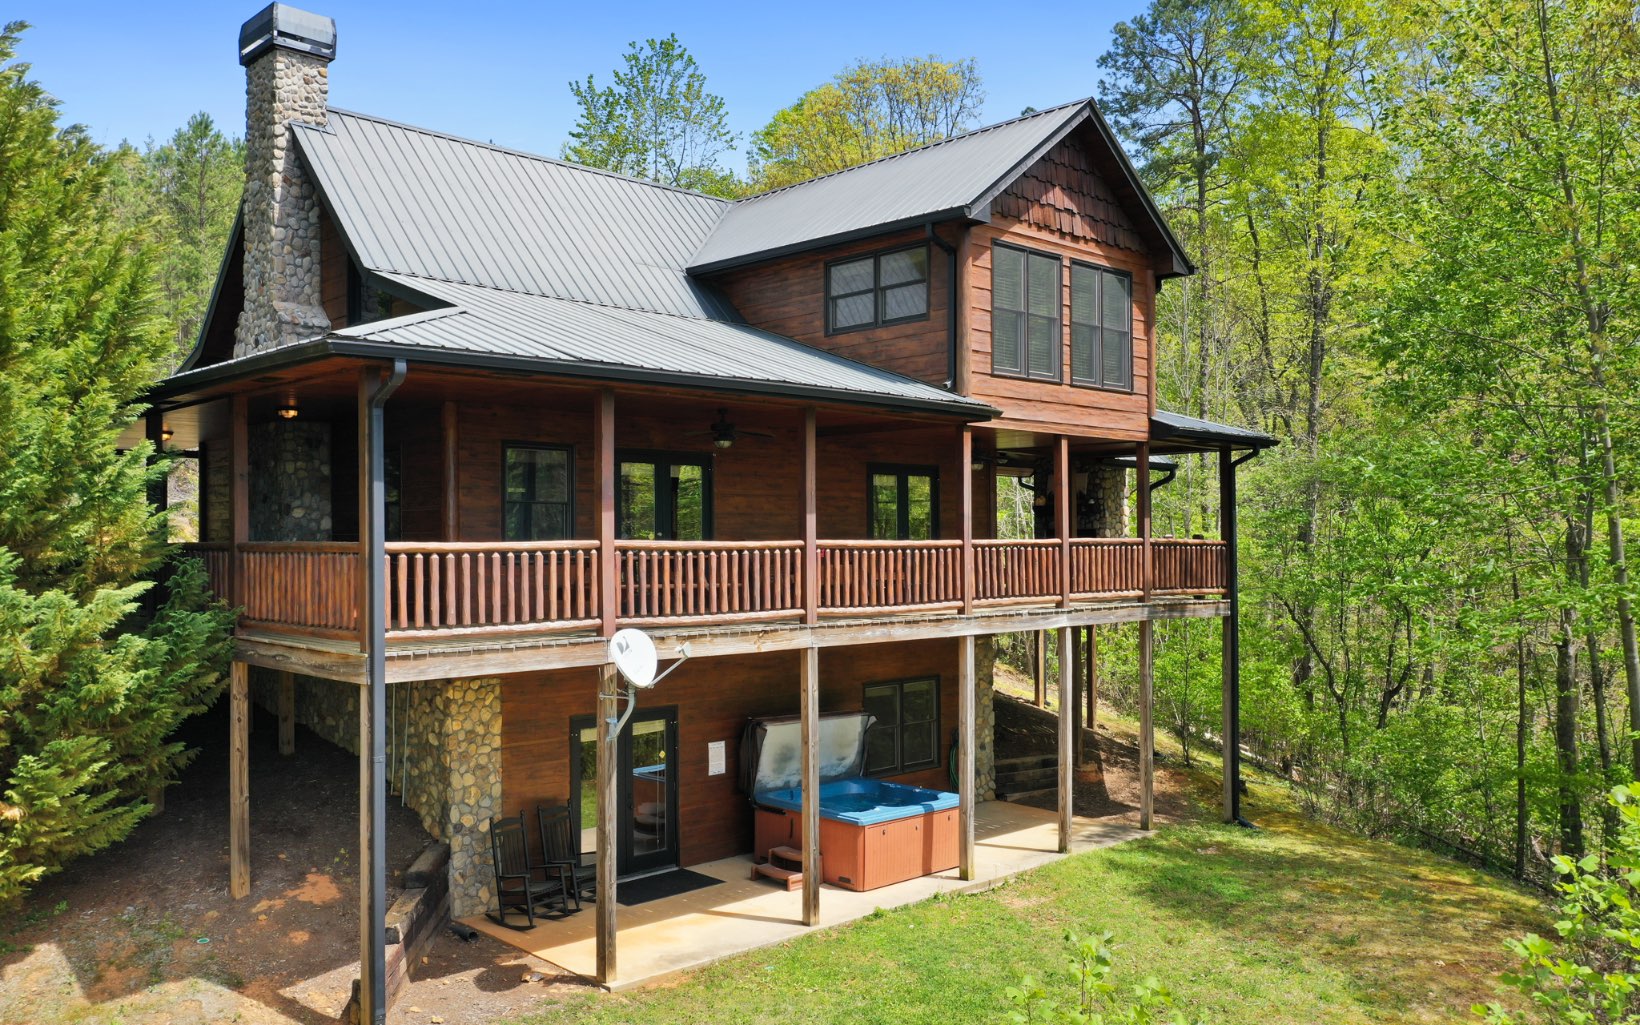 Turnkey Rental alert!! Gorgeous Cabin in the North Georgia Mountains. 3 bd/3ba, granite countertops, outdoor fireplace, full finished basement with game room. Extra large master, with jetted tub & separate stand up shower. The best part of cabin is the outdoor area with full wrap around deck and separate sitting area and real wood burning fireplace. Views of the beautiful Blue Ridge Mountains. Fully furnished cabin with rustic decor. Successful rental with My Mountain Cabin Rentals. "Alley's Hideaway" Book a weekend to see if this is the one ! Second Home or Vacation Rental for friends and family. You will love the privacy.